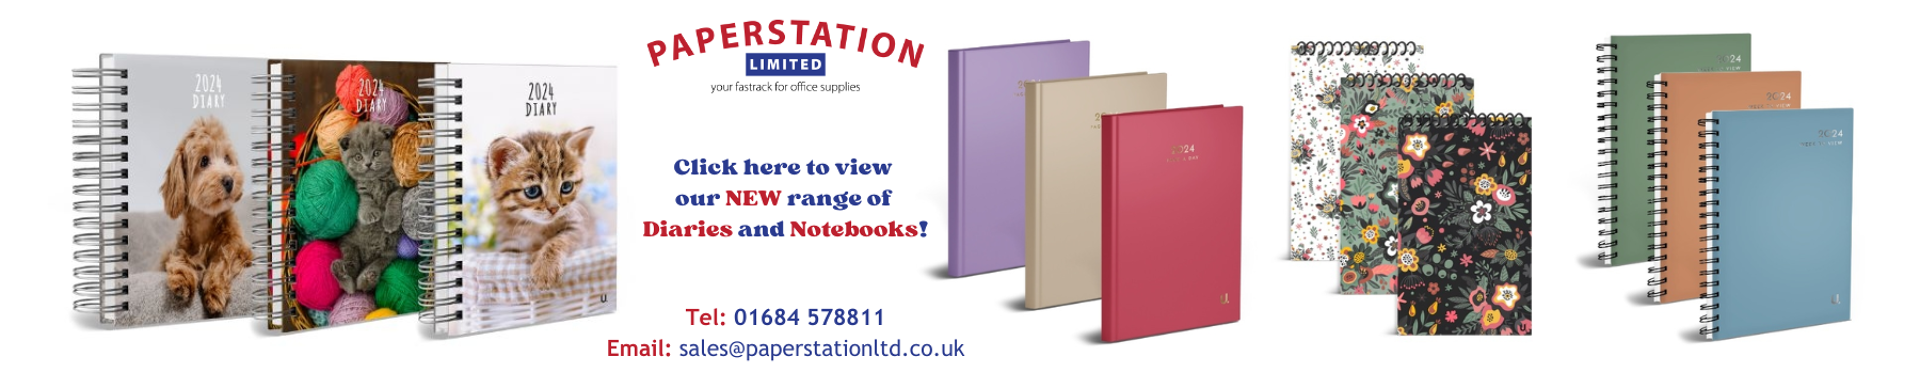 https://e7ut8we.cloudimg.io/v7/https://www.paperstationltd.co.uk/ws_content/slideshow/Click here to view our NEW range of Diaries and Notebooks! (1).png?force_format=webp&func=crop&h=380&w=1920